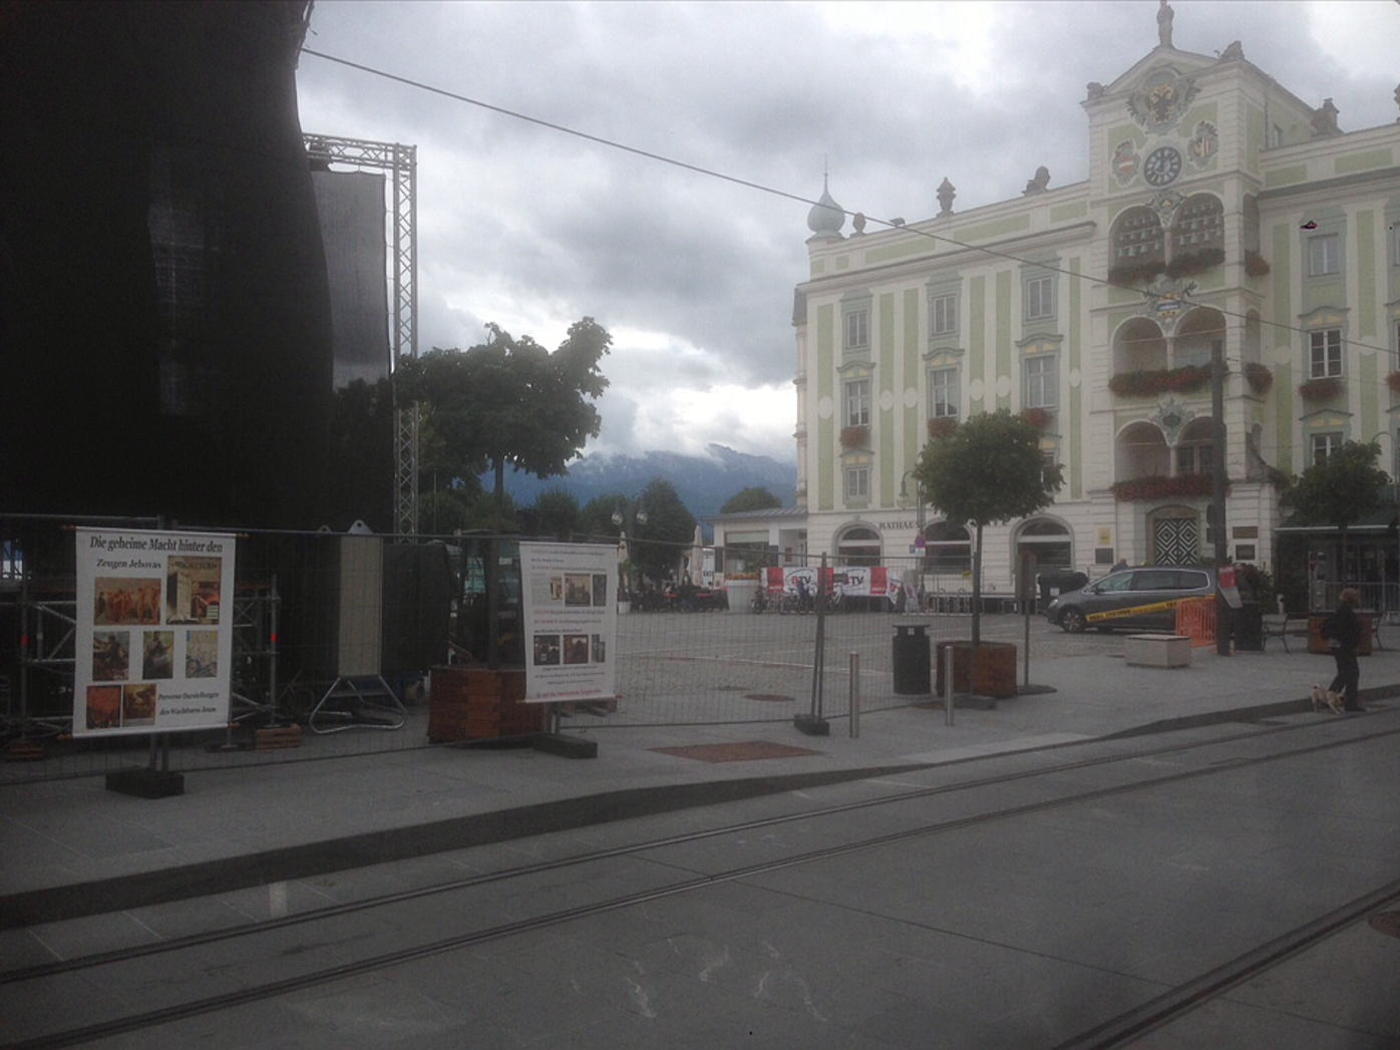 Action in Gmunden town square and in front of two kingdom halls